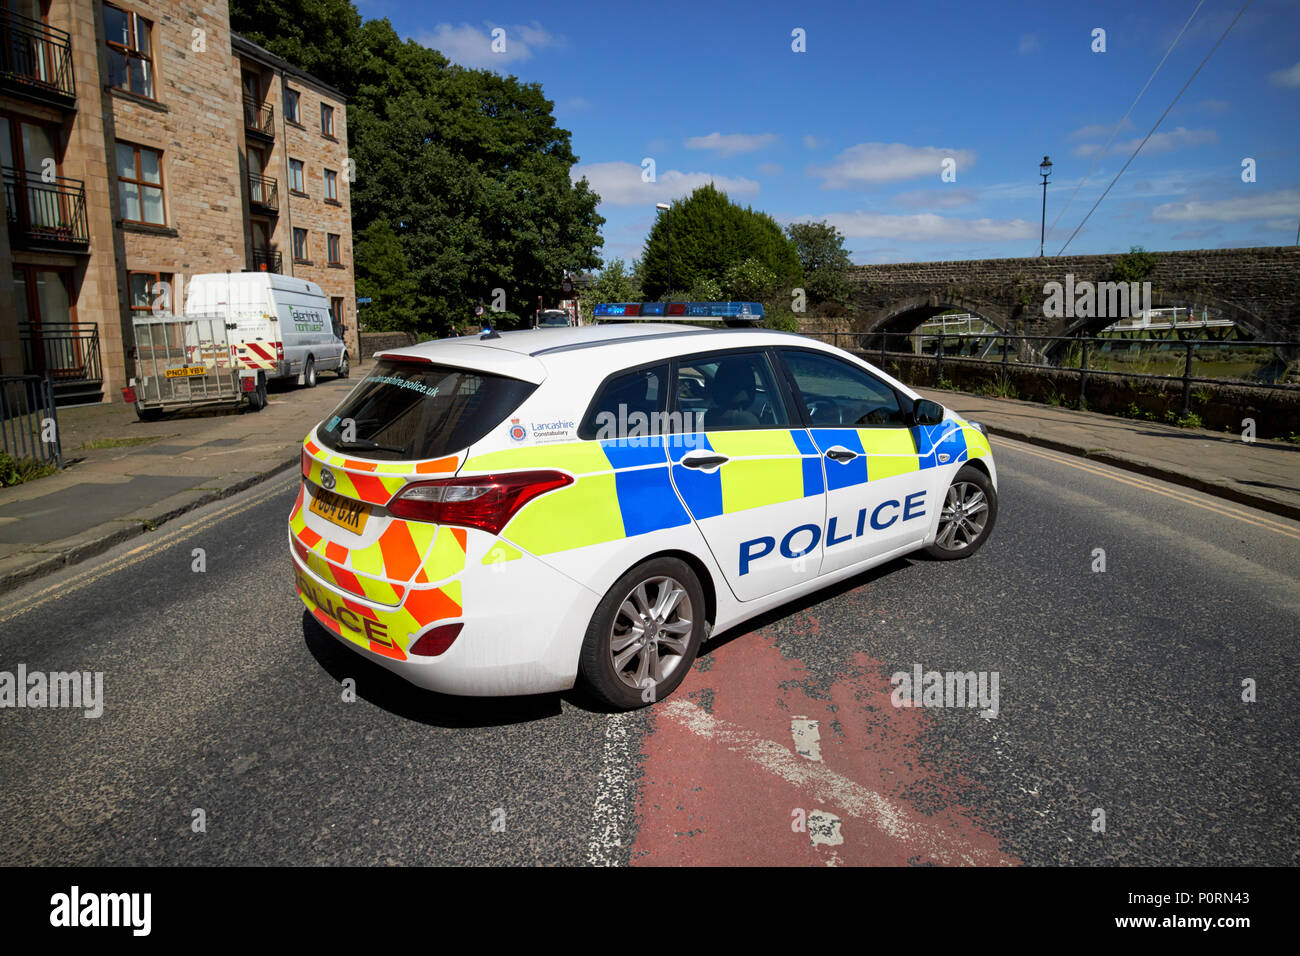 Lancashire constabulary hyundai i30 estate police vehicle in the middle of the road due to an incident lancaster Lancashire England UK Stock Photo